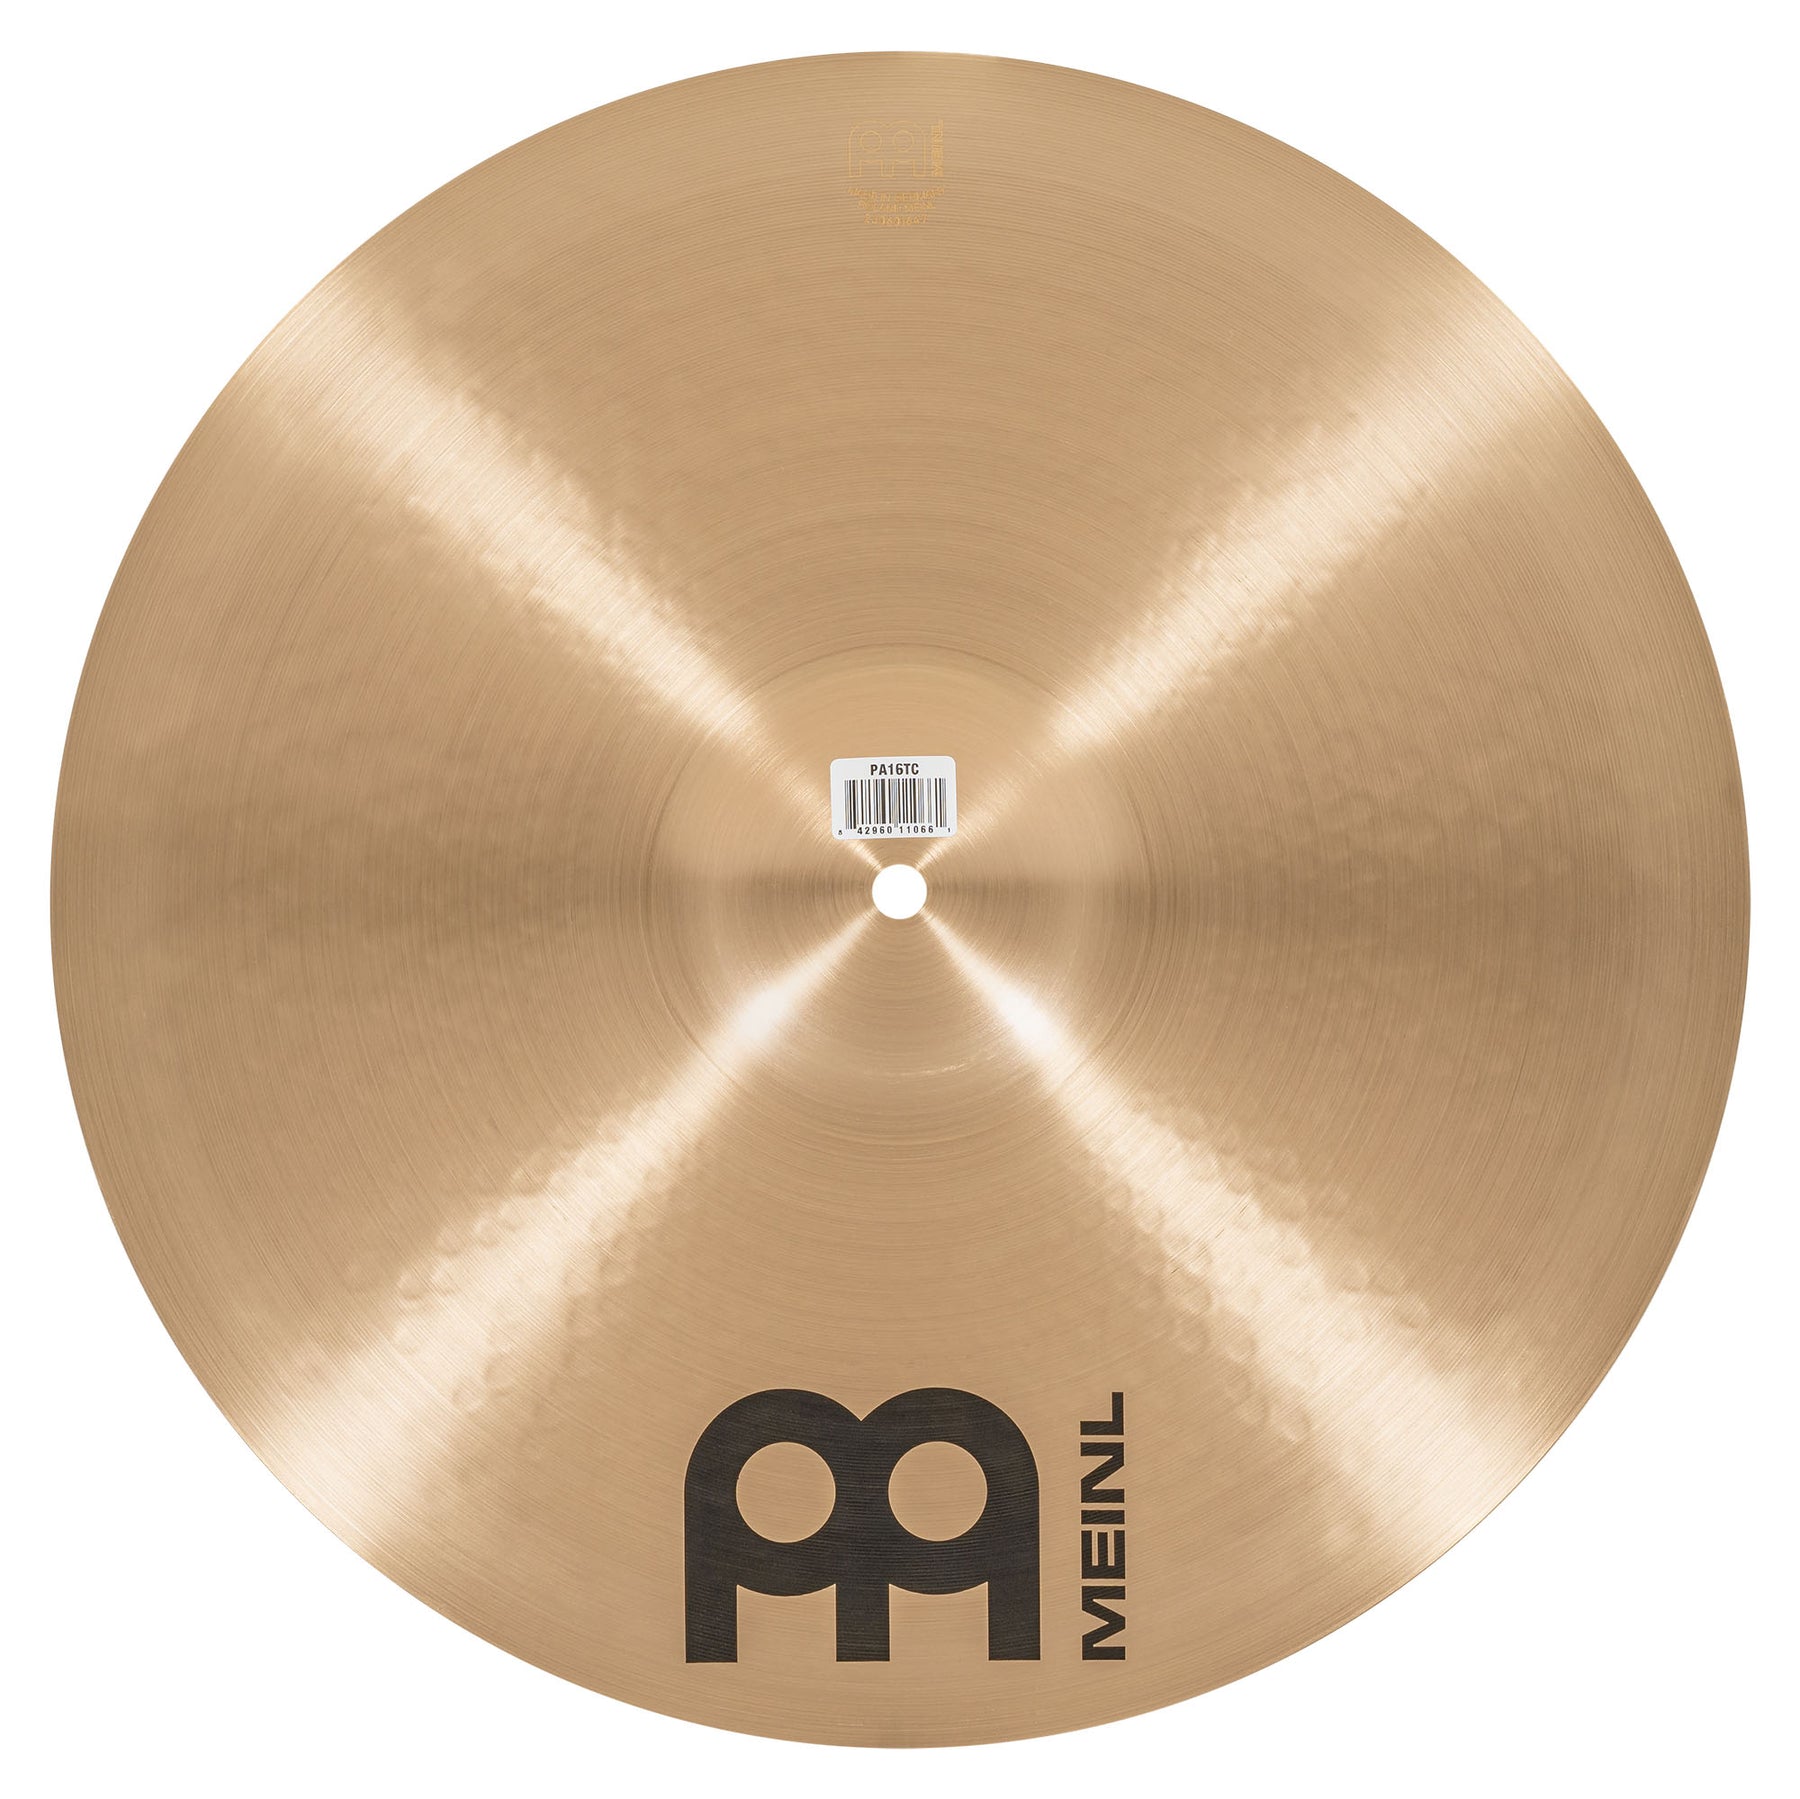 Meinl Pure Alloy Cymbals At Into Music – Into Music Store